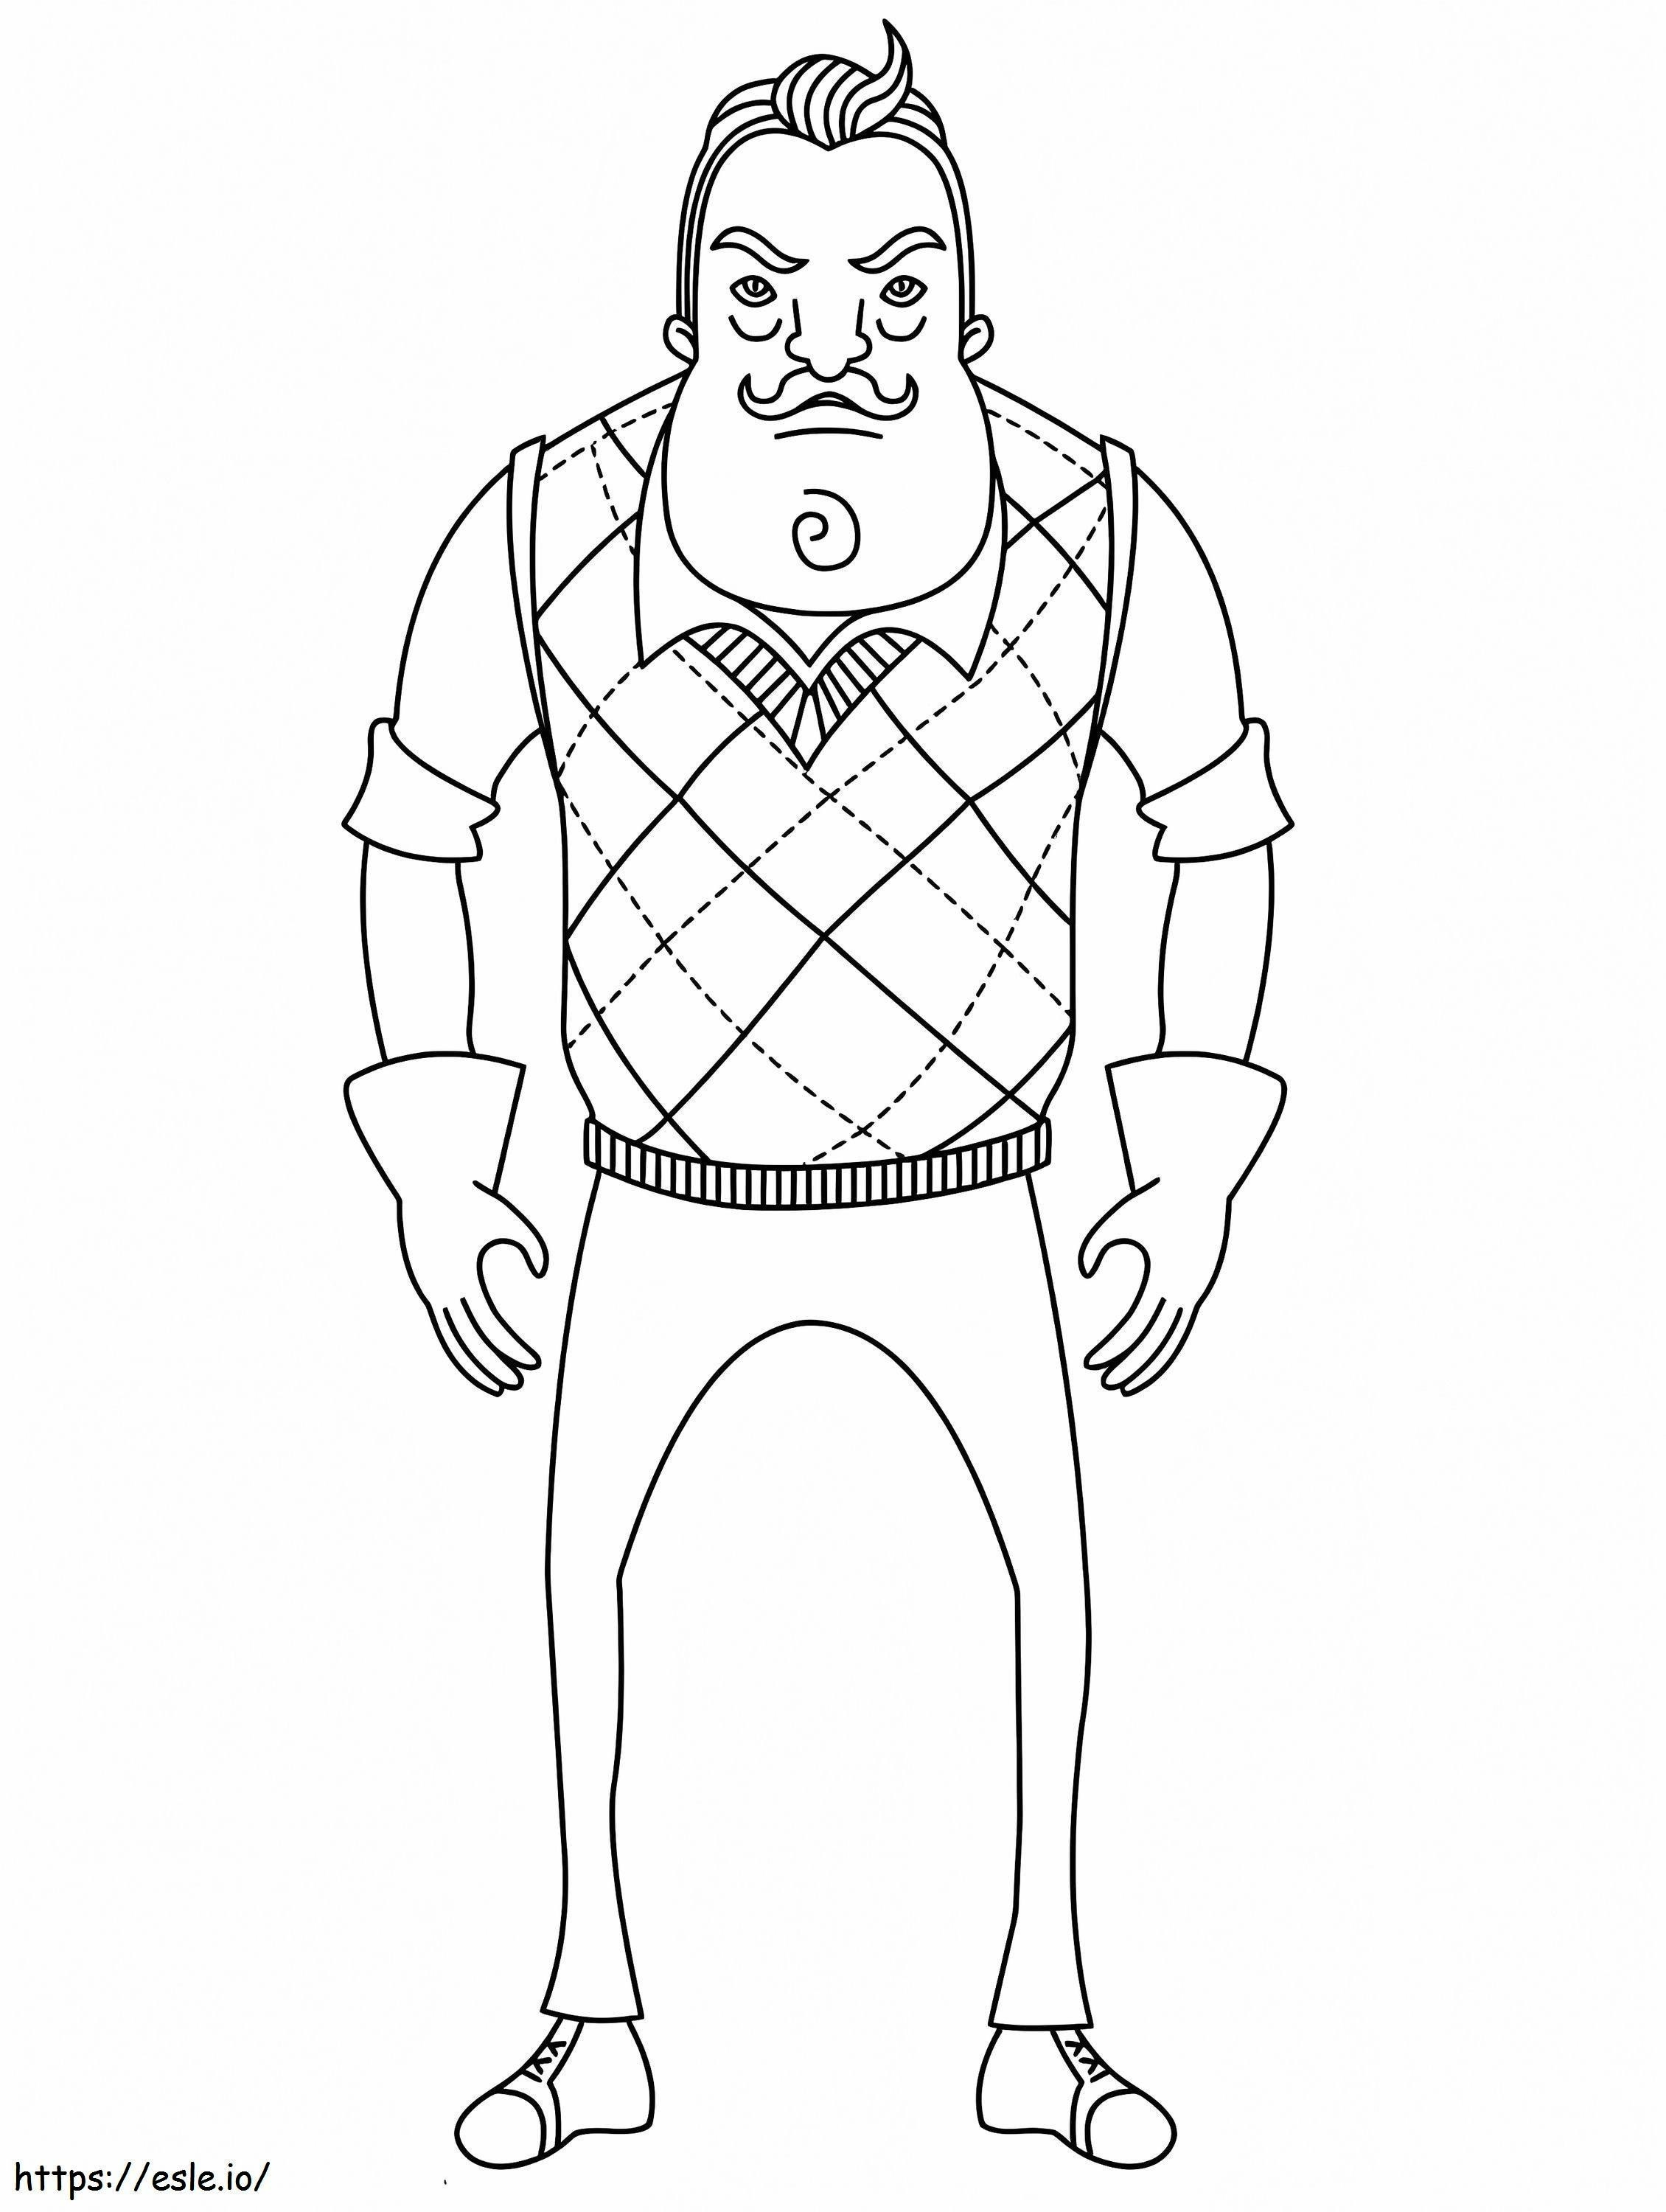 Hello Neighbor coloring page